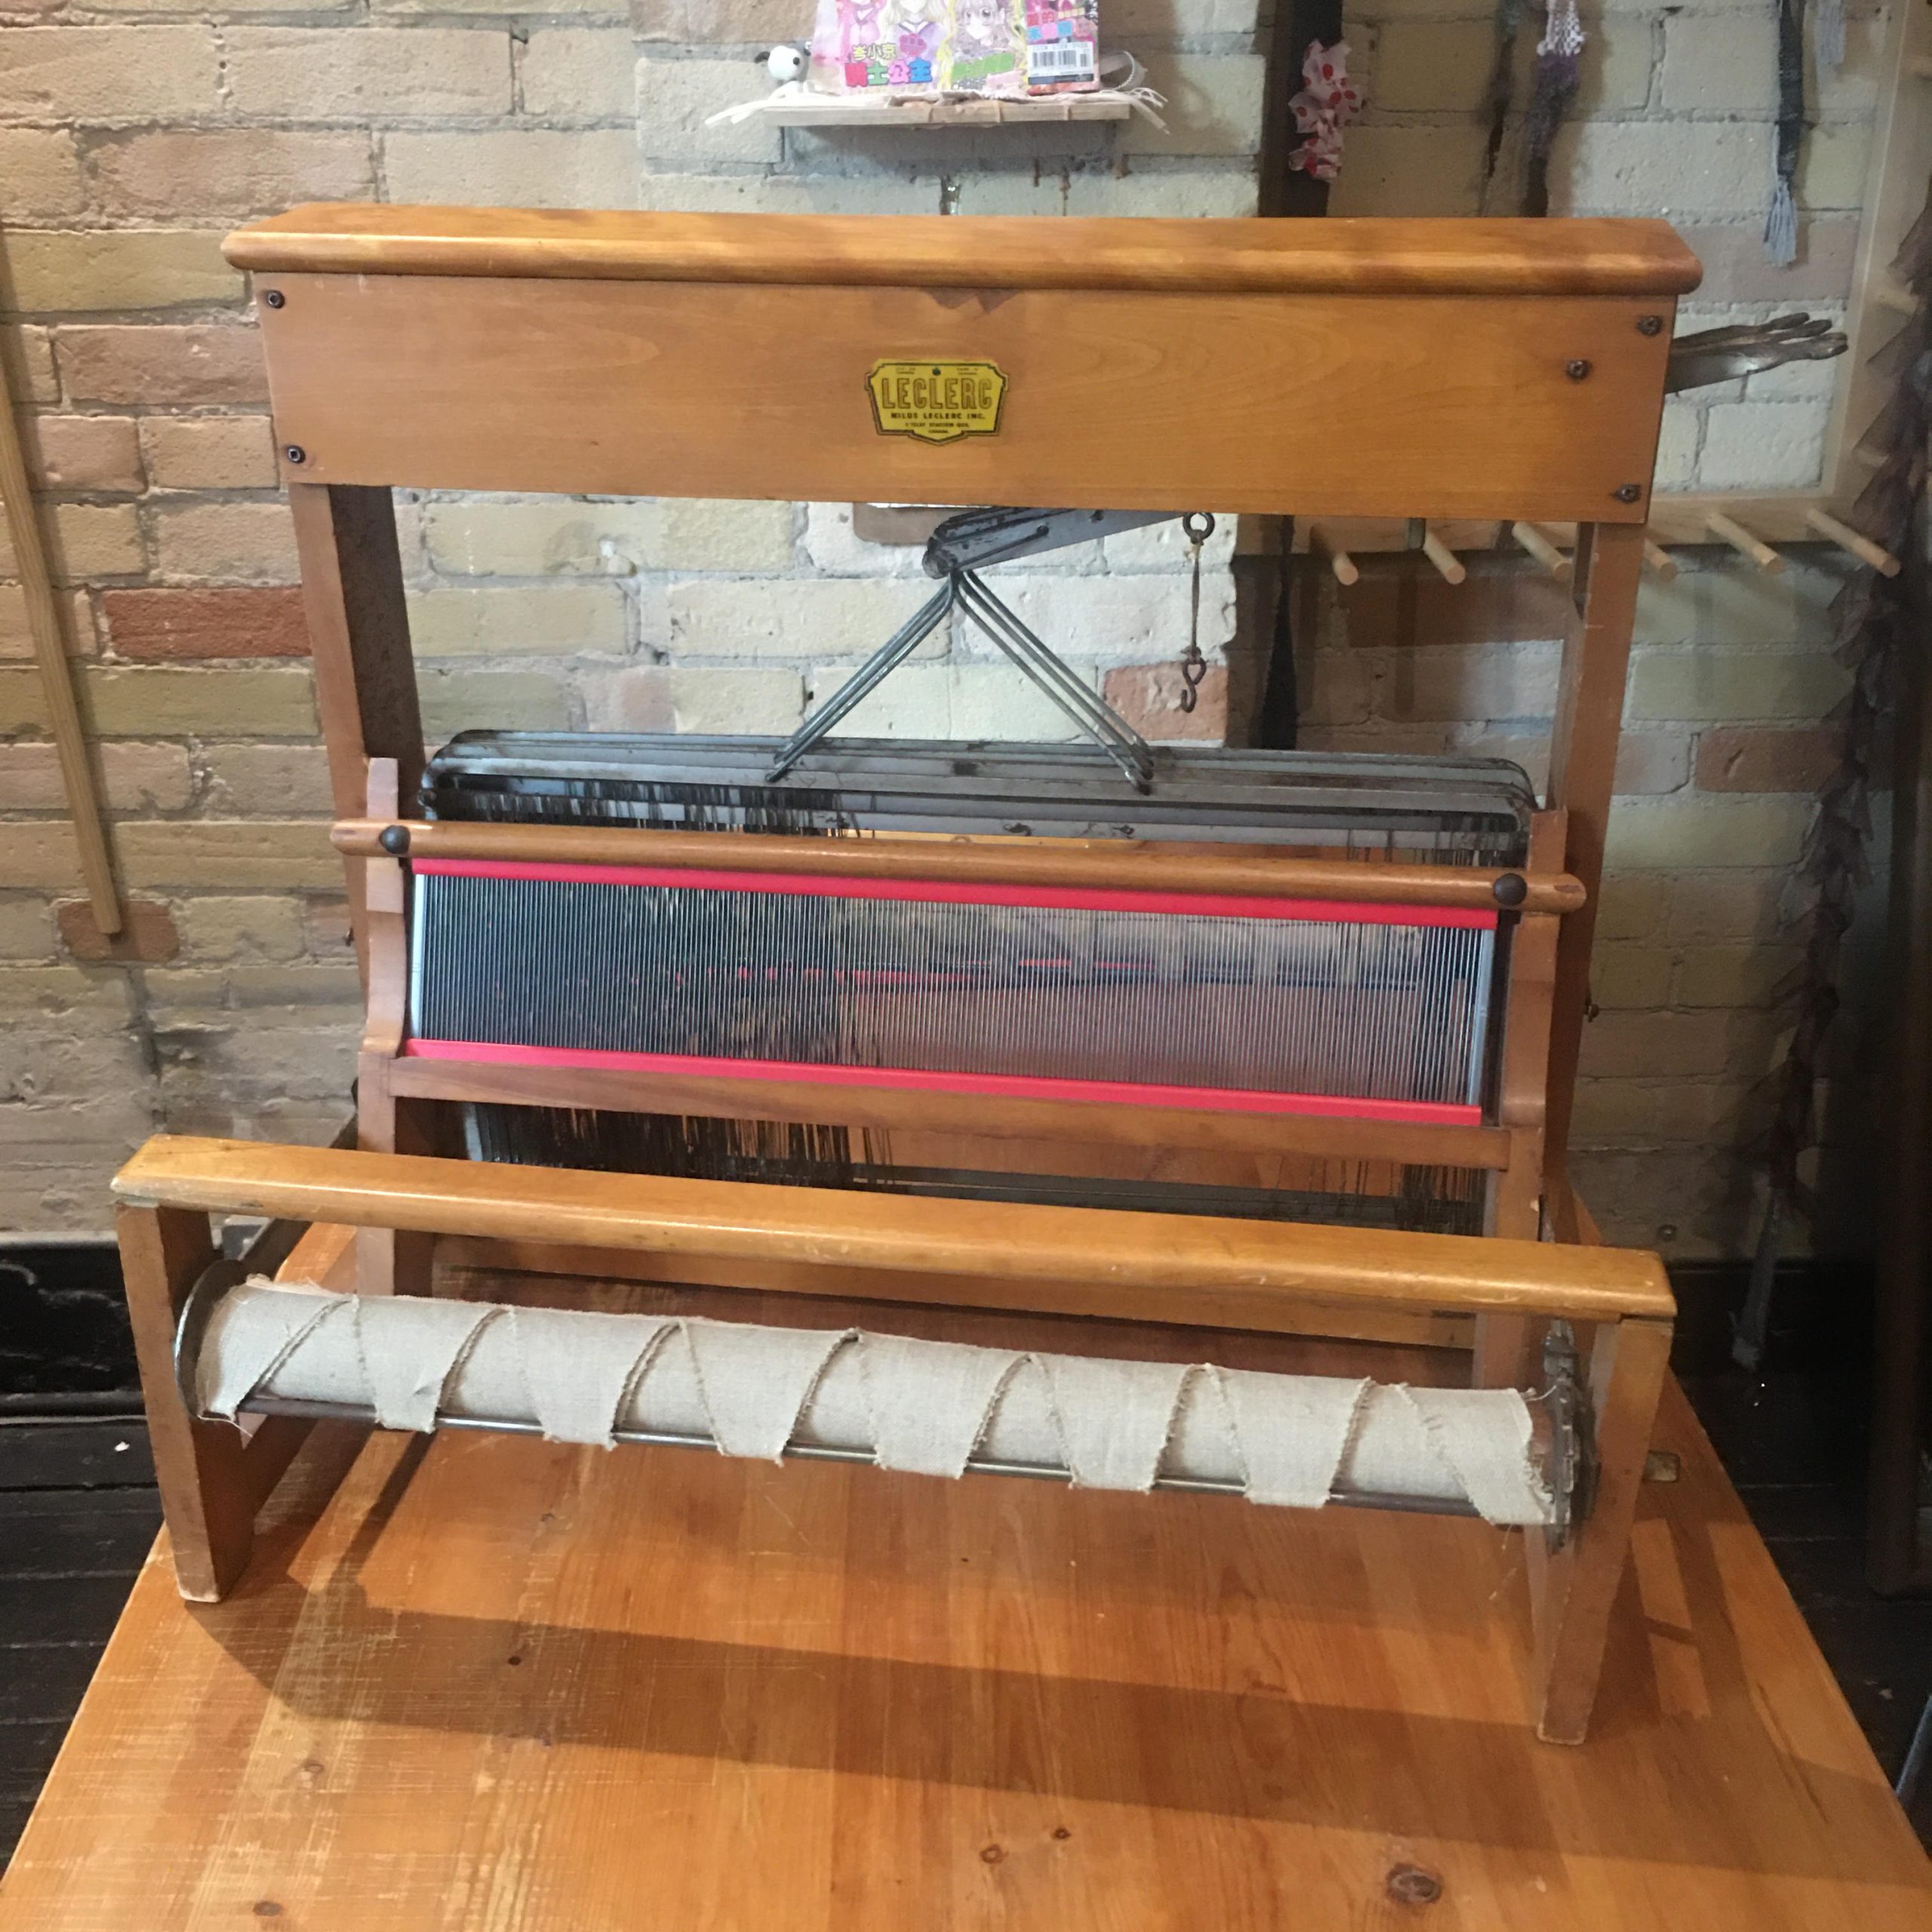 Sold: LeClerc Table Loom and Accessories (Toronto)